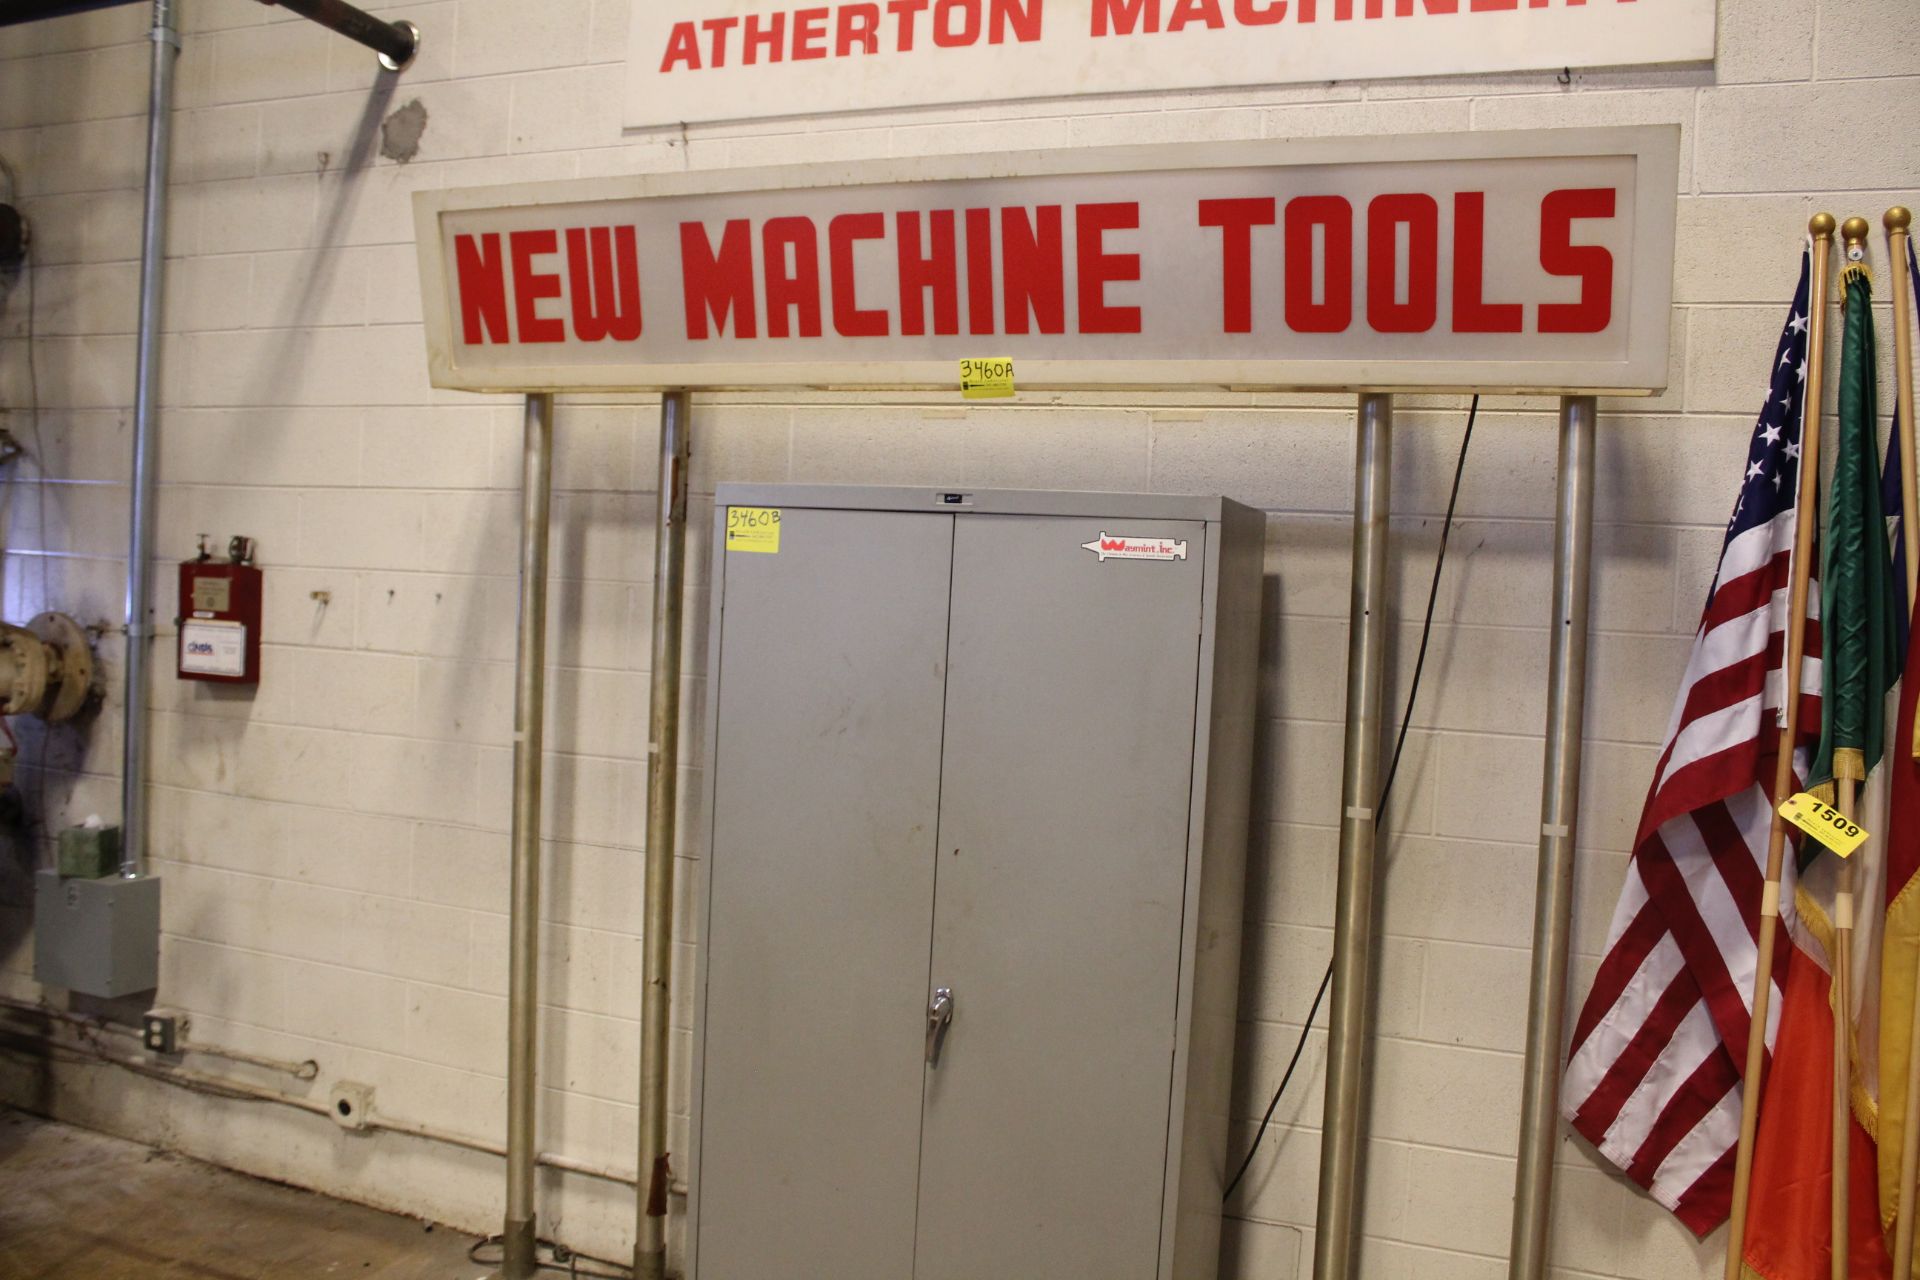 LIGHTED "NEW MACHINE TOOLS" SIGN